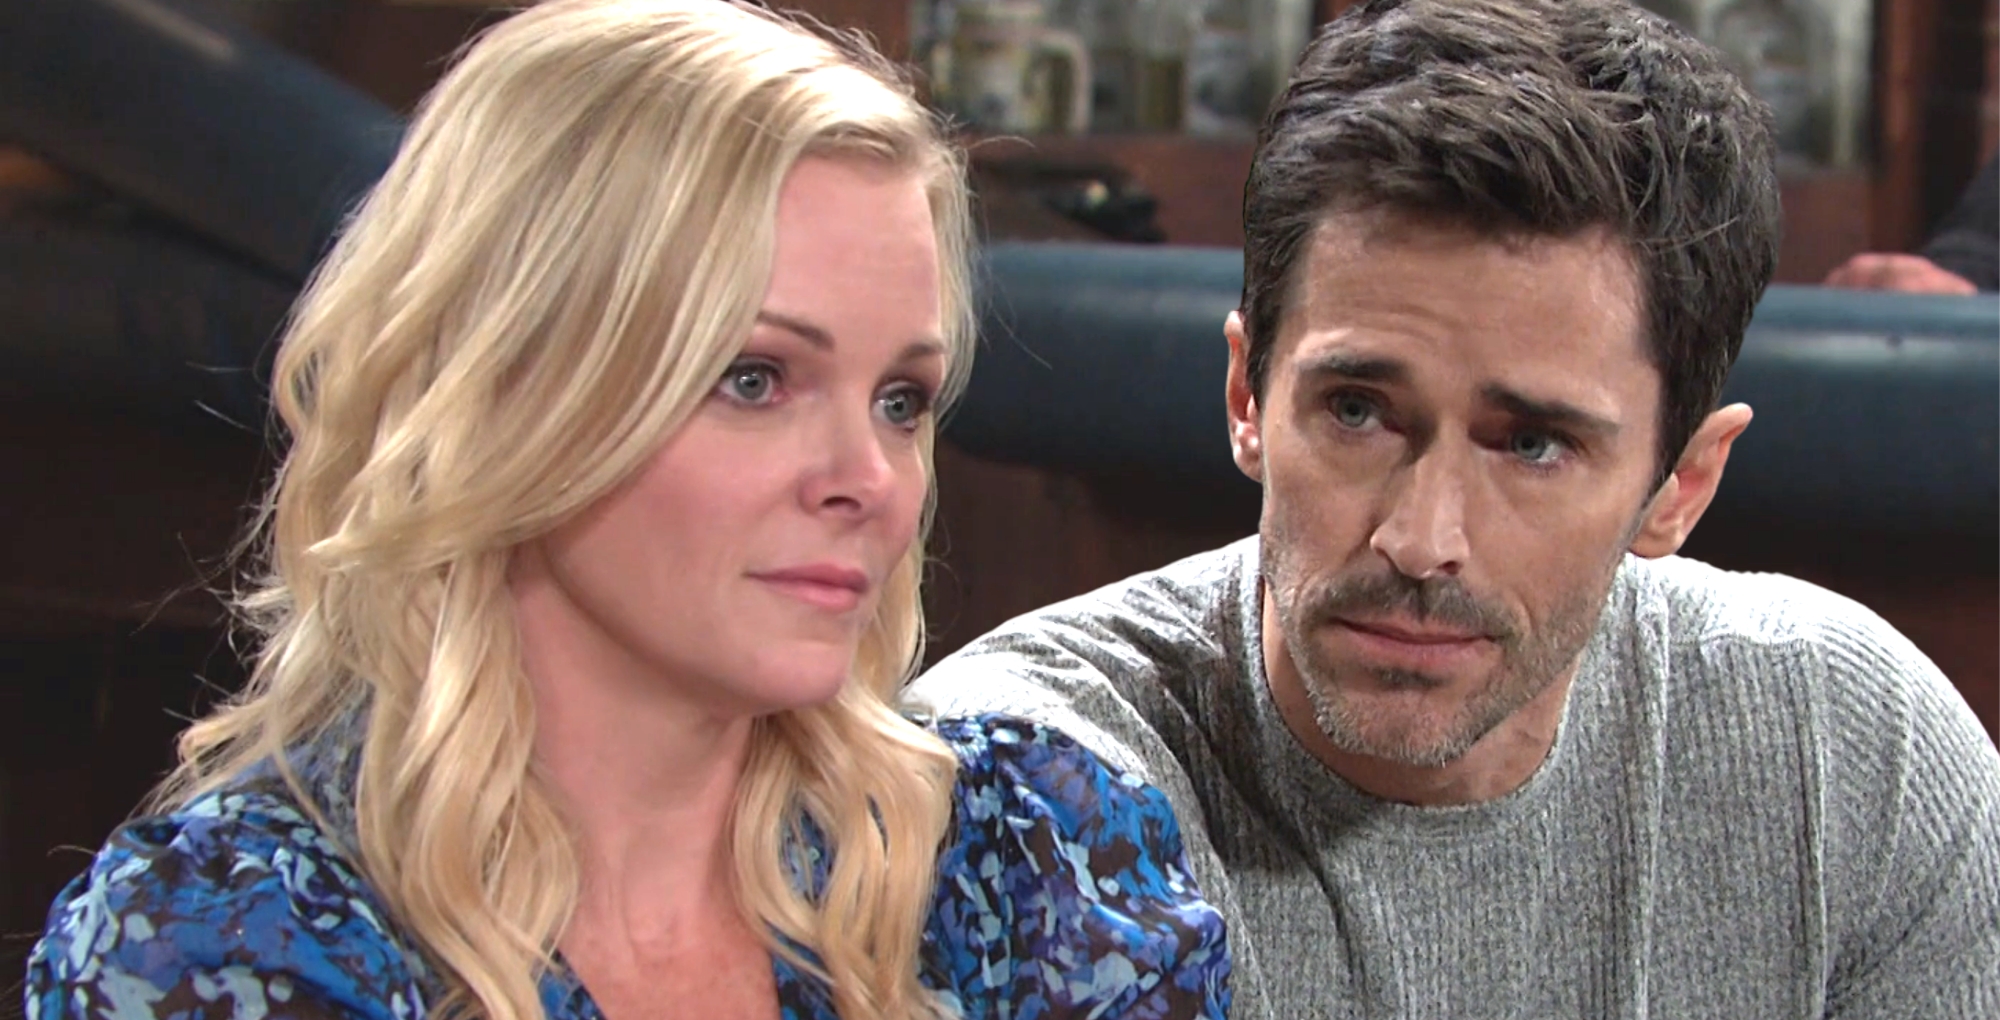 Help Me: Will Belle Brady Be There For Shawn on Days of our Lives?